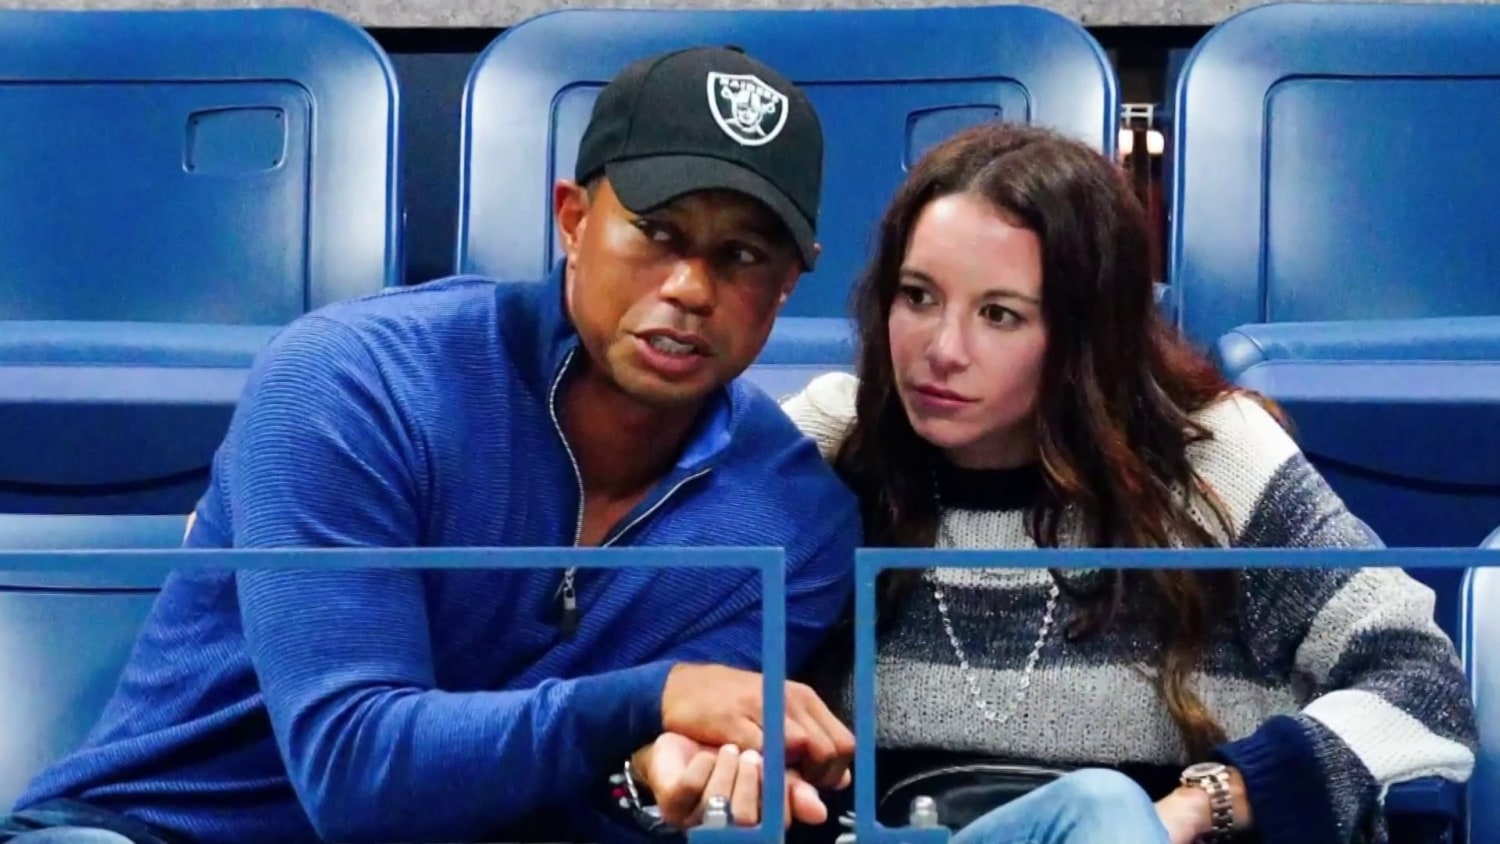 Tiger Woods former girlfriend wants NDA nullified, citing sexual assault picture